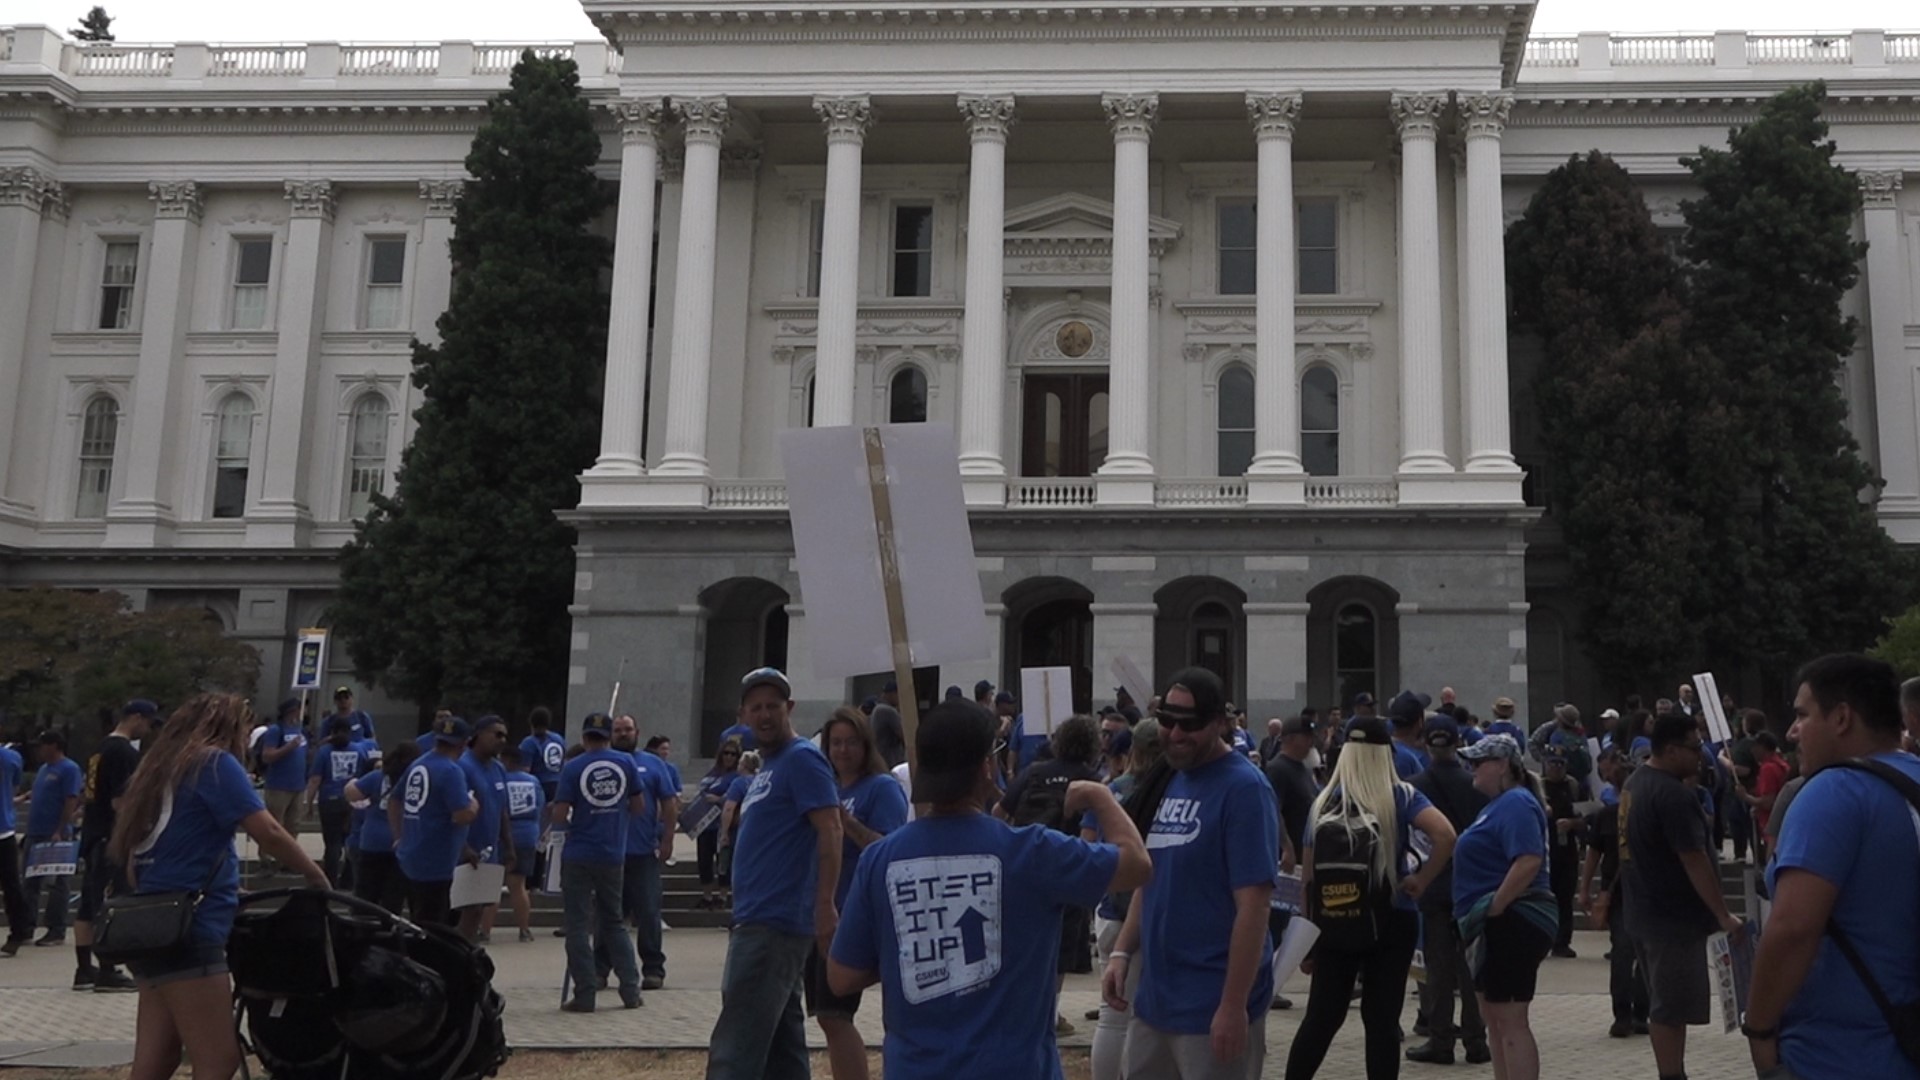 Monday's rally was to raise awareness of Senate Bill 410, which calls on Governor Newsom to address and correct the salary structure of non-faculty staff members.